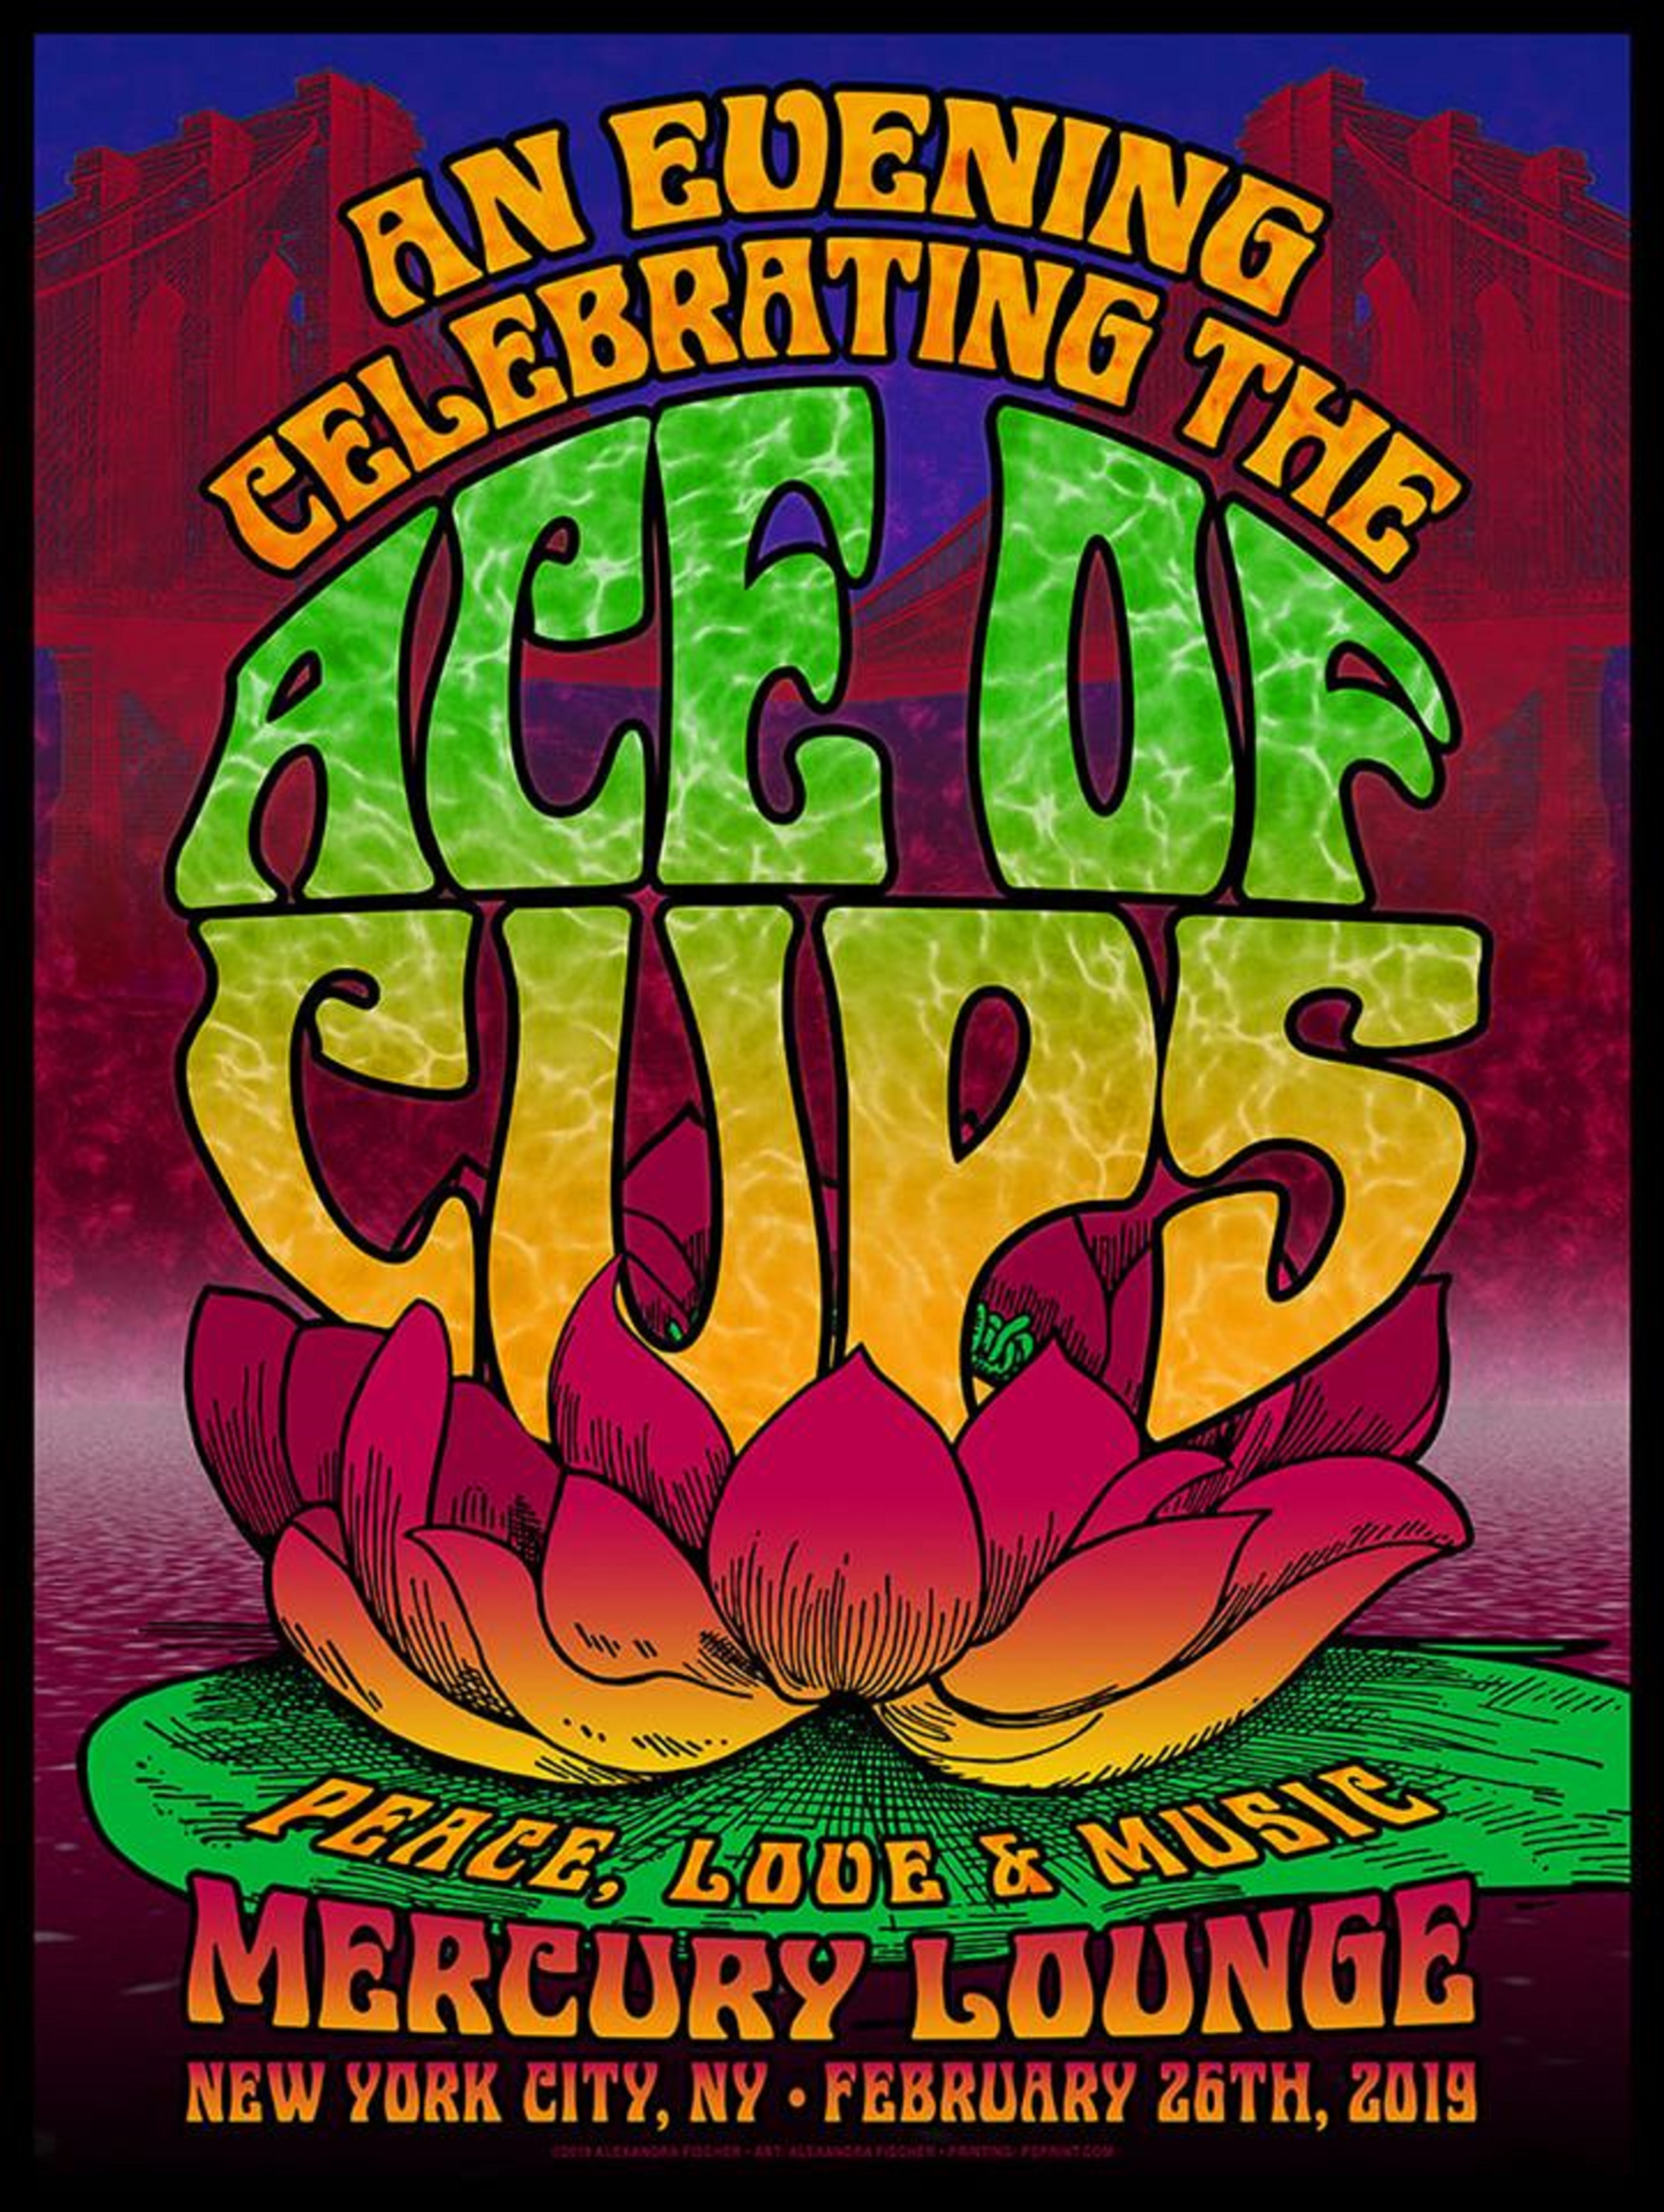 5 of cups and ace of cups